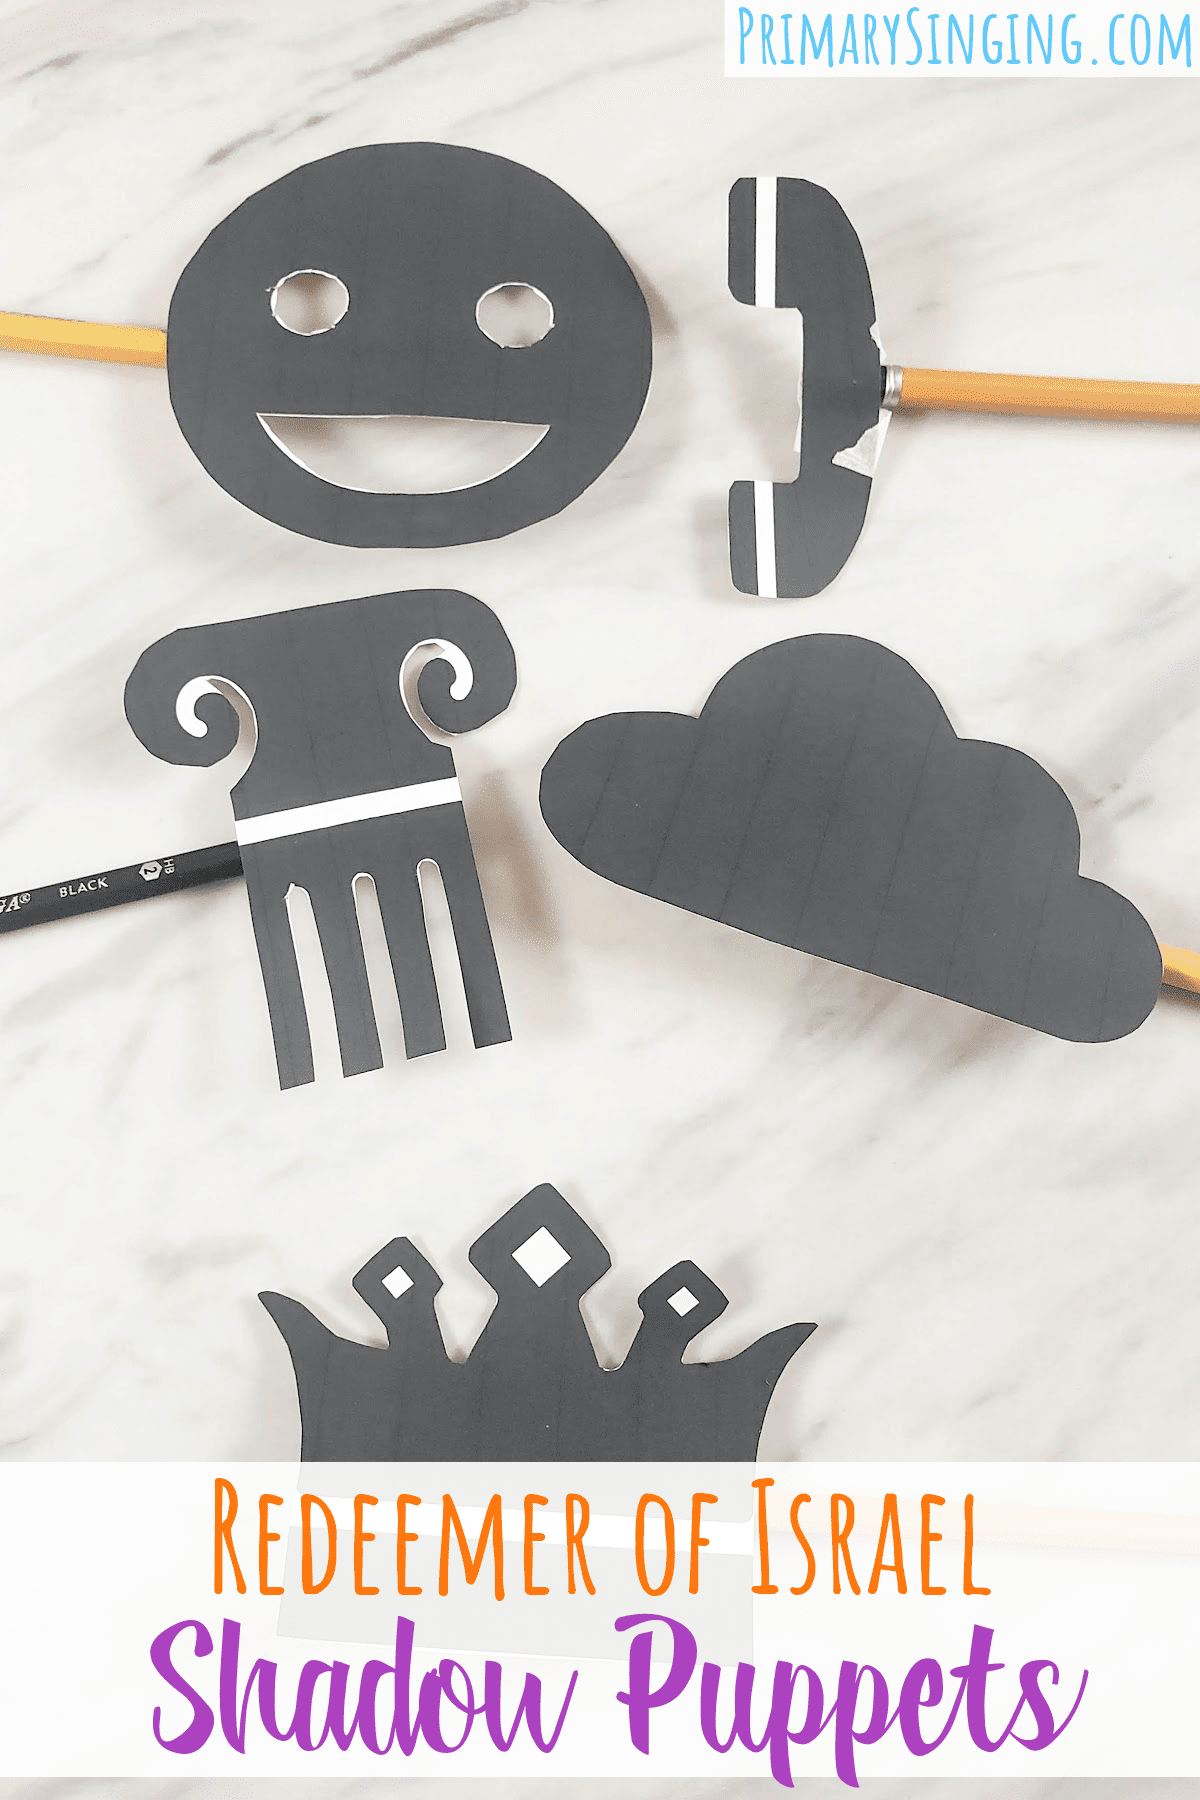 Redeemer of Israel Shadow Puppets singing time fun printable song helps for LDS Primary music leaders teaching Redeemer of Israel! Let the kids hold these cute puppets to create shadows and help the song lyrics come to life!